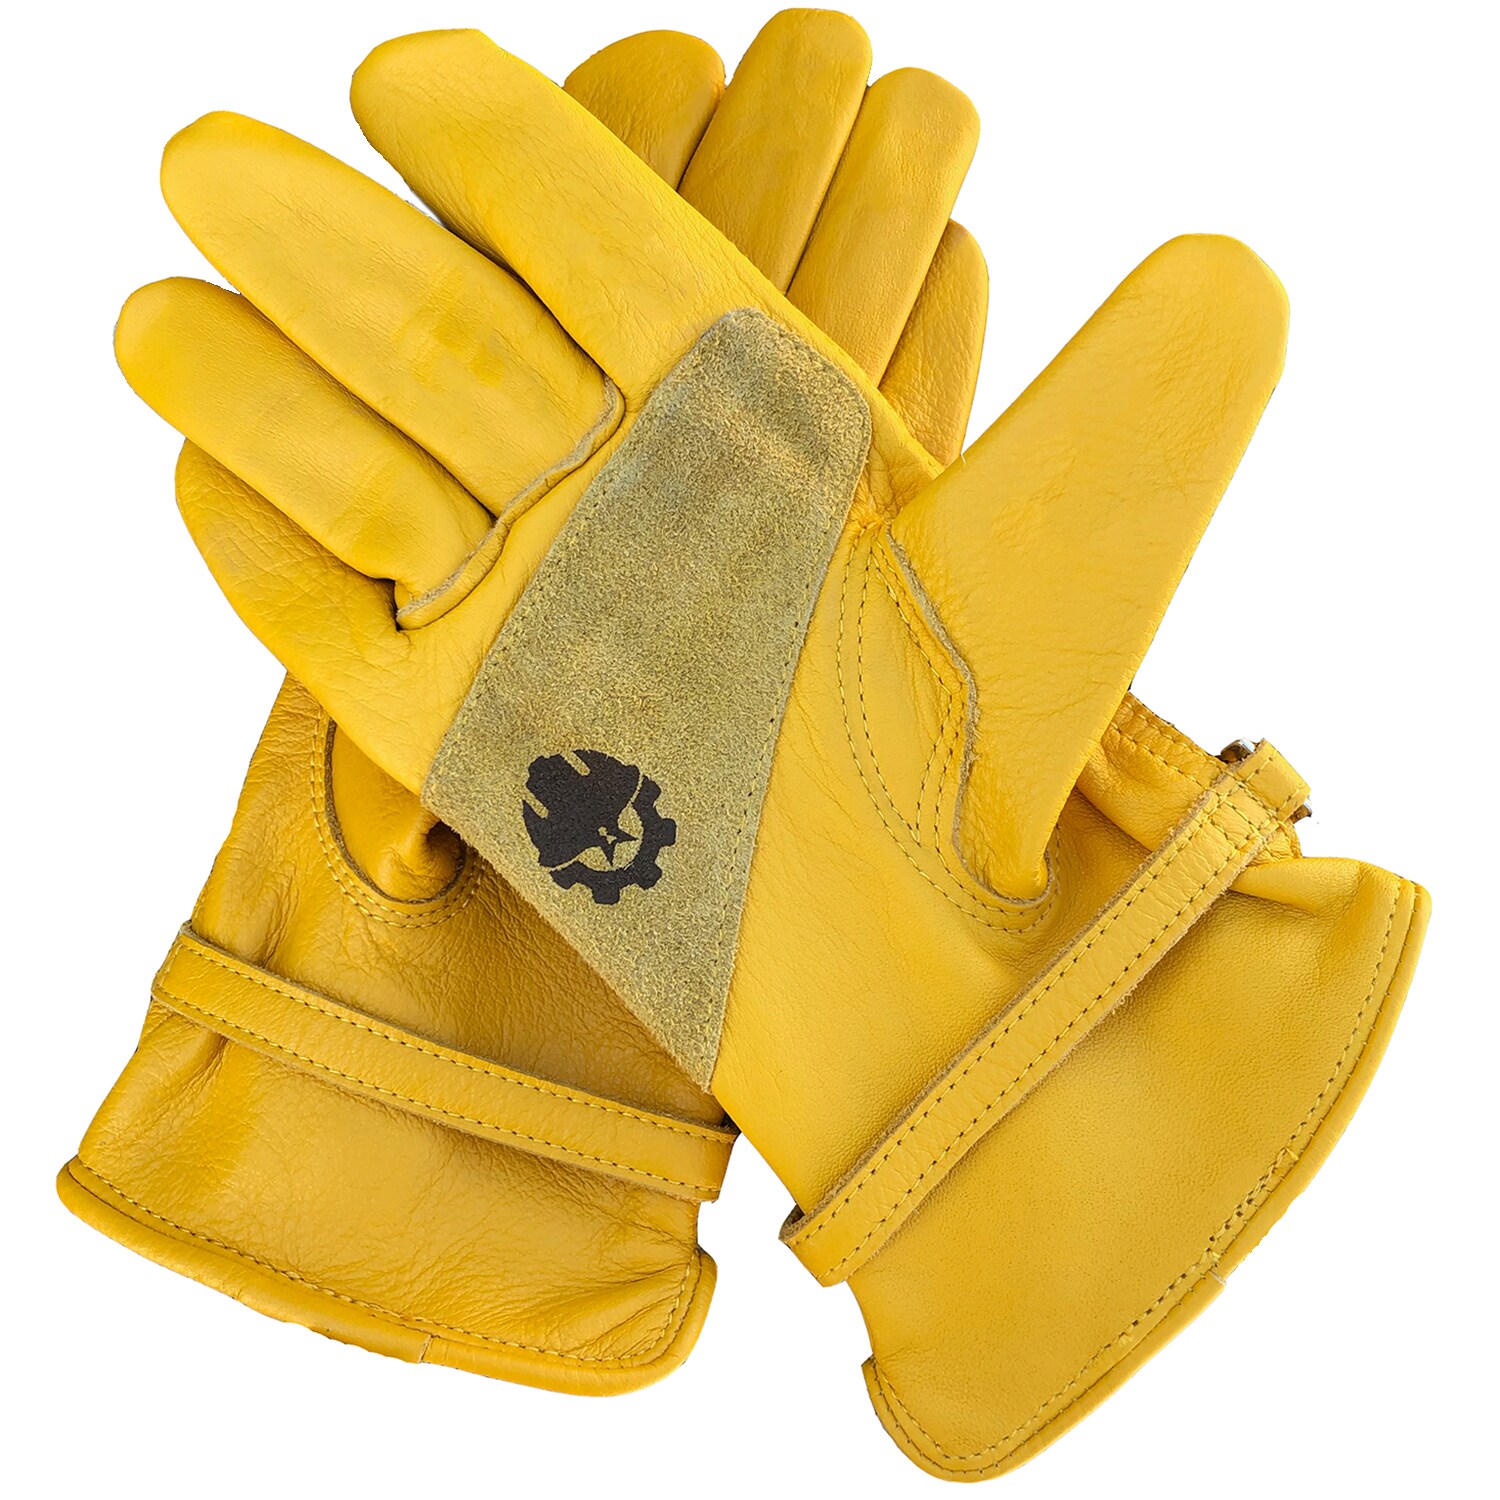 1Pair L/XL Working Cowhide Leather Gloves Garden Labor Safety Security Protector 